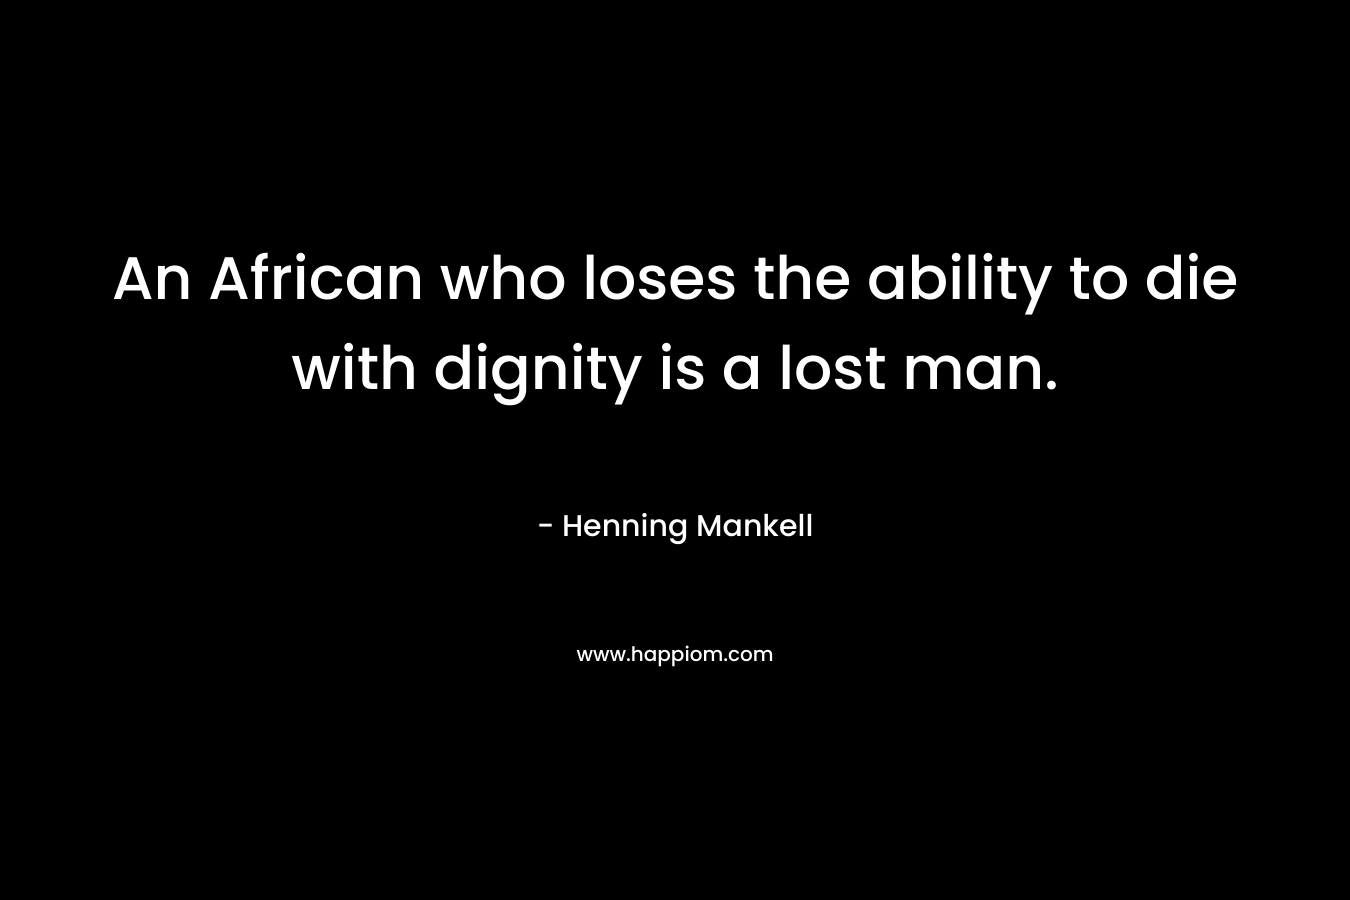 An African who loses the ability to die with dignity is a lost man. – Henning Mankell